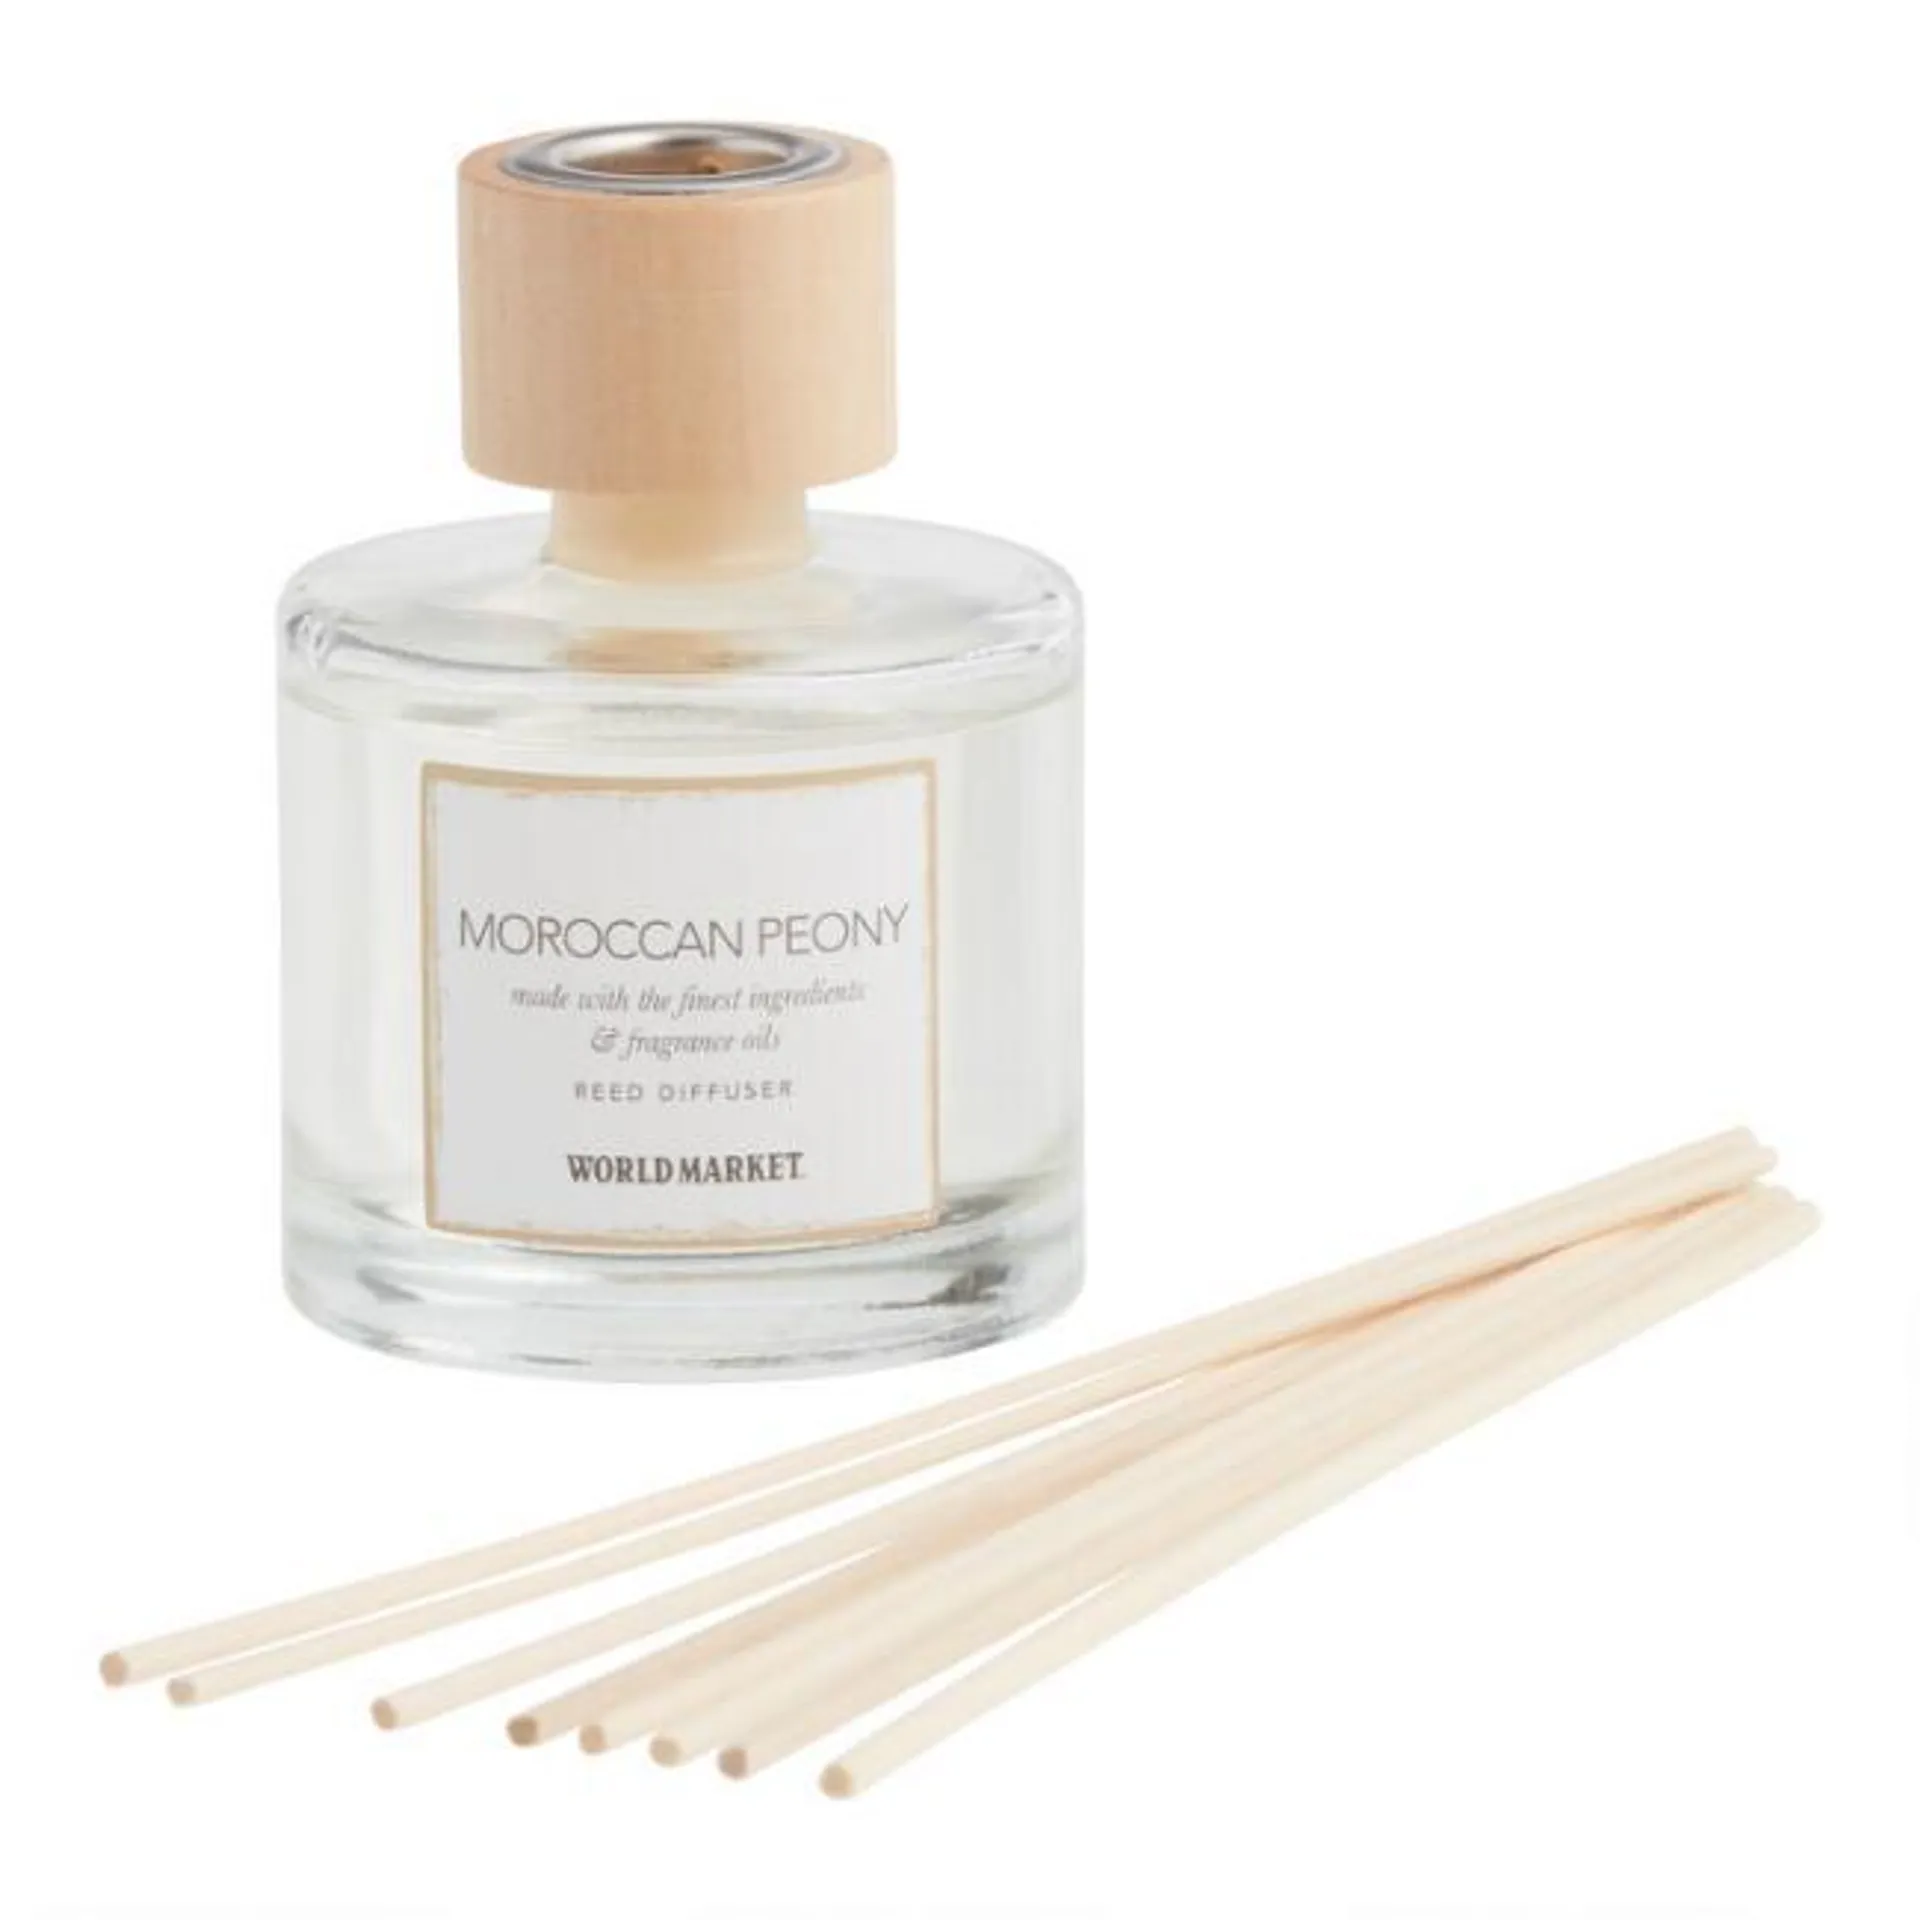 Moroccan Peony Reed Diffuser